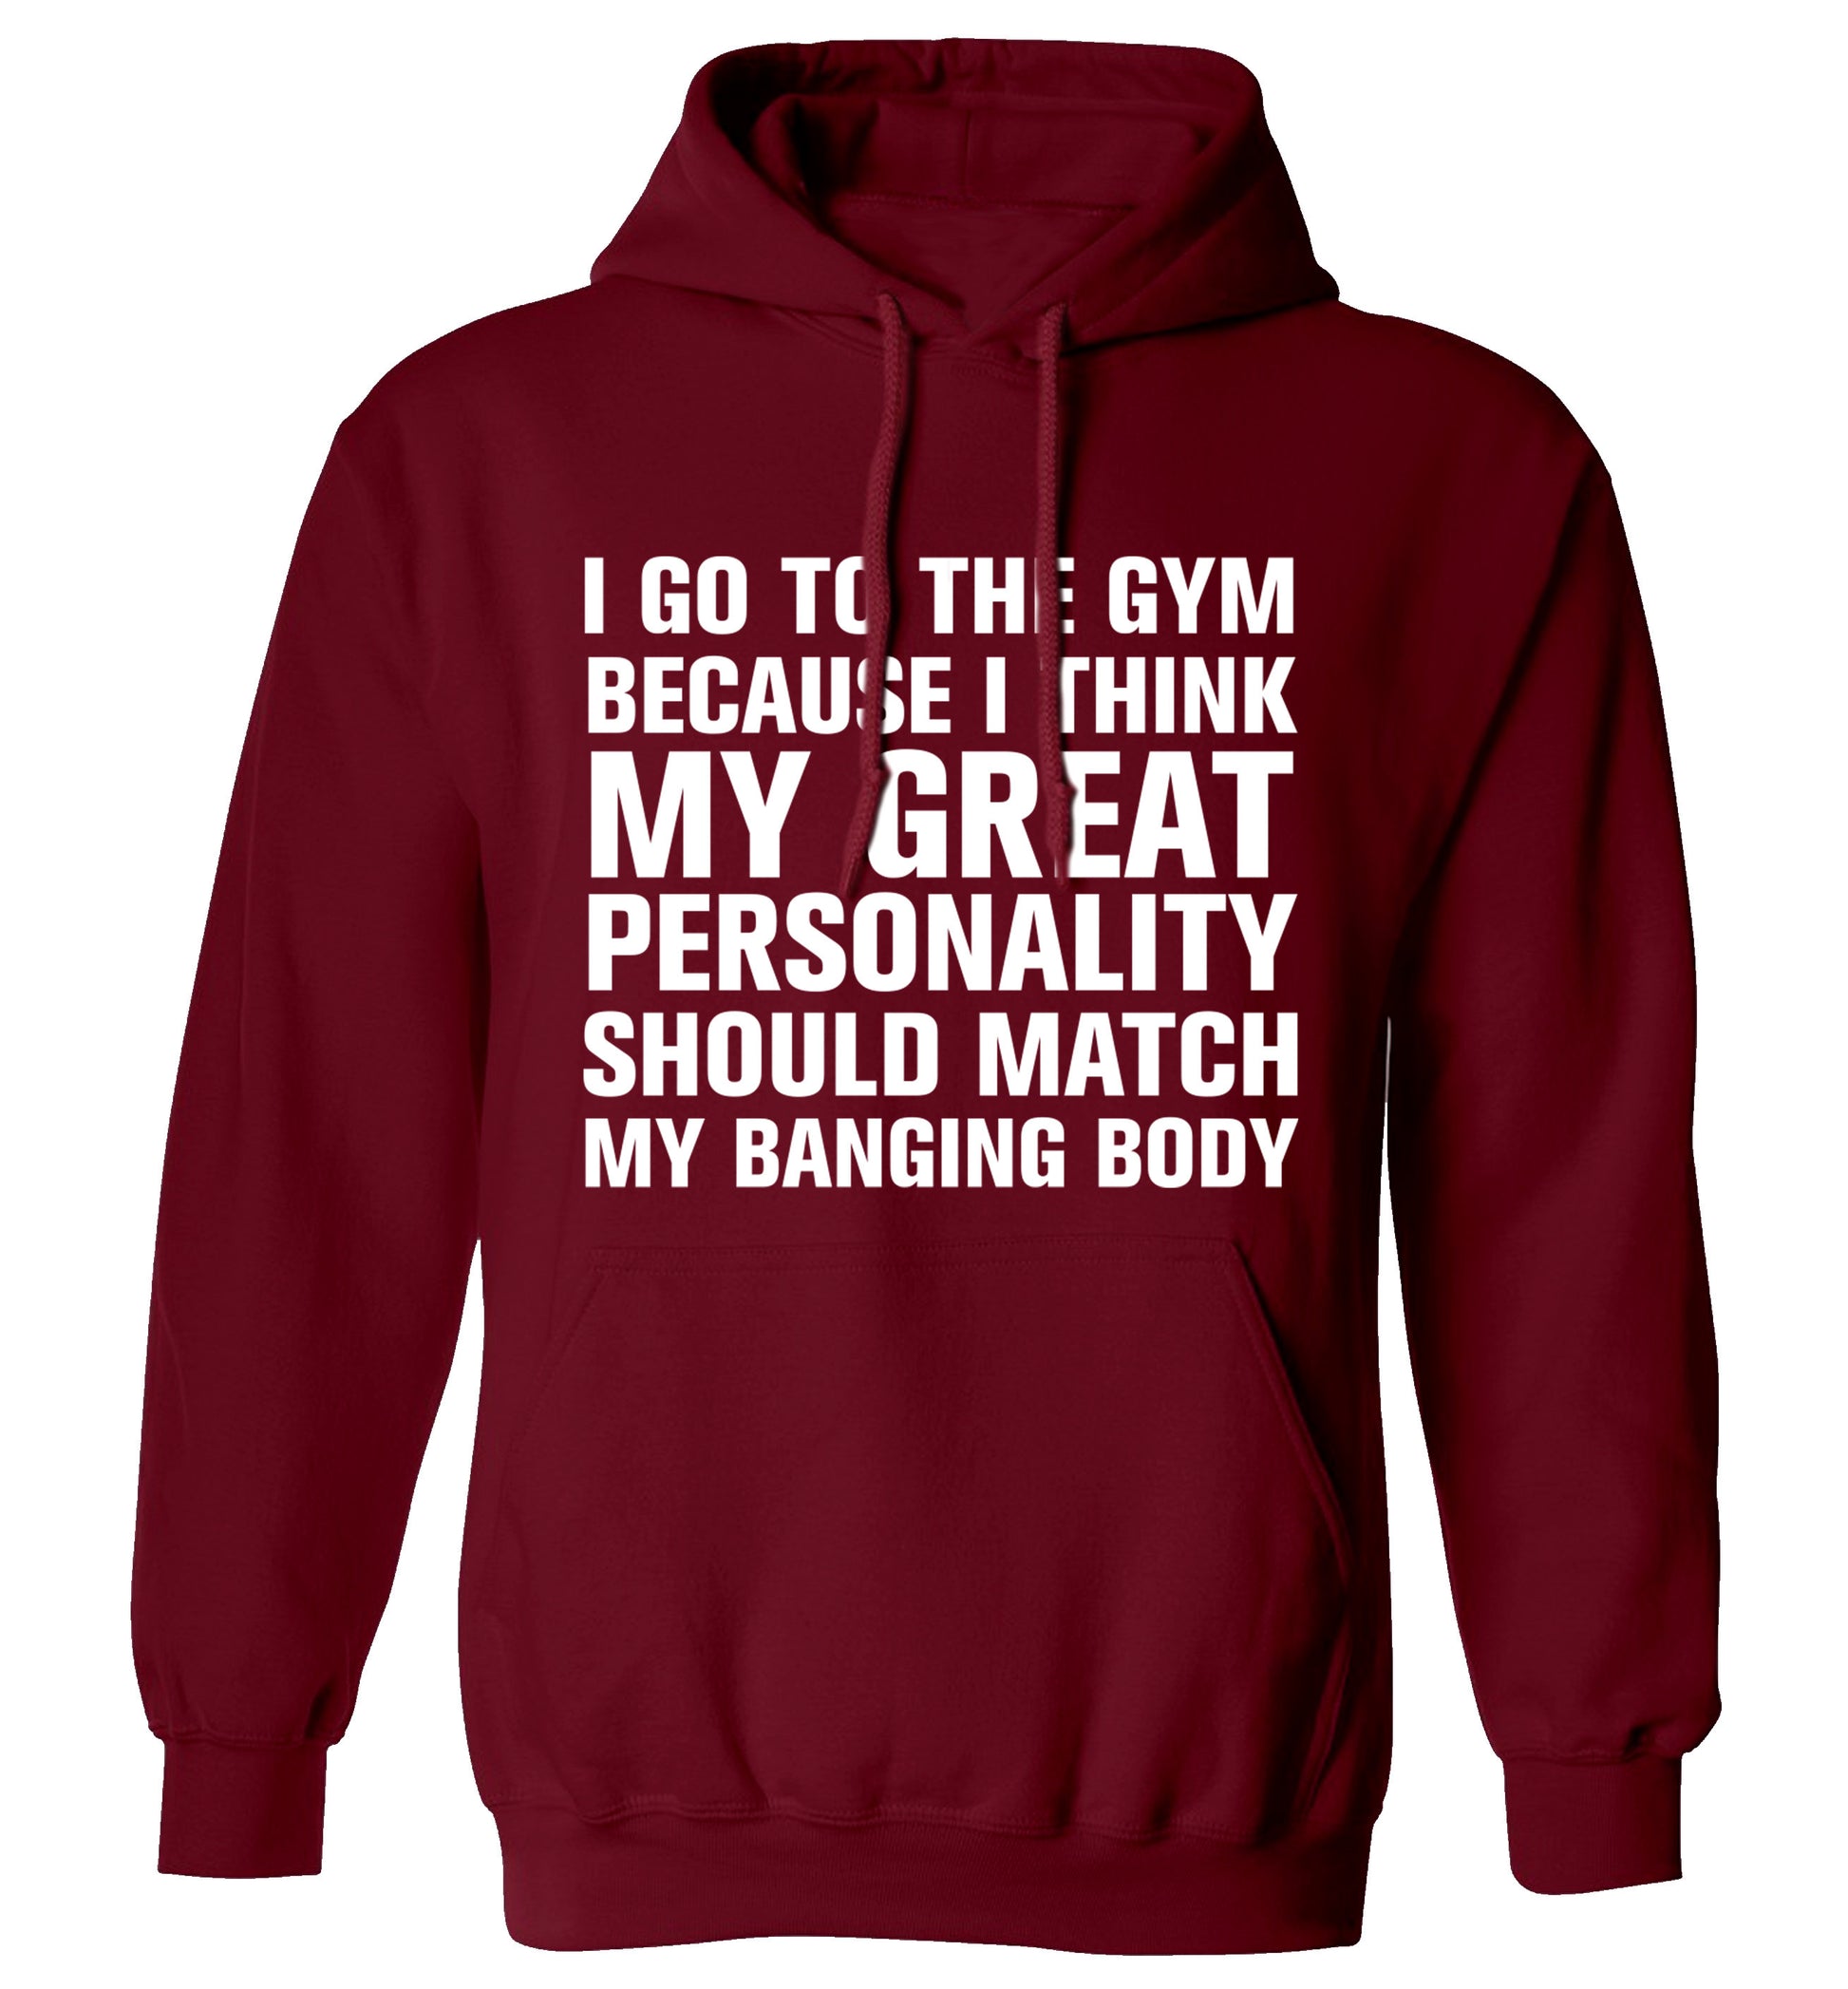 I go to the gym because I think my great personality should match my banging body adults unisex maroon hoodie 2XL